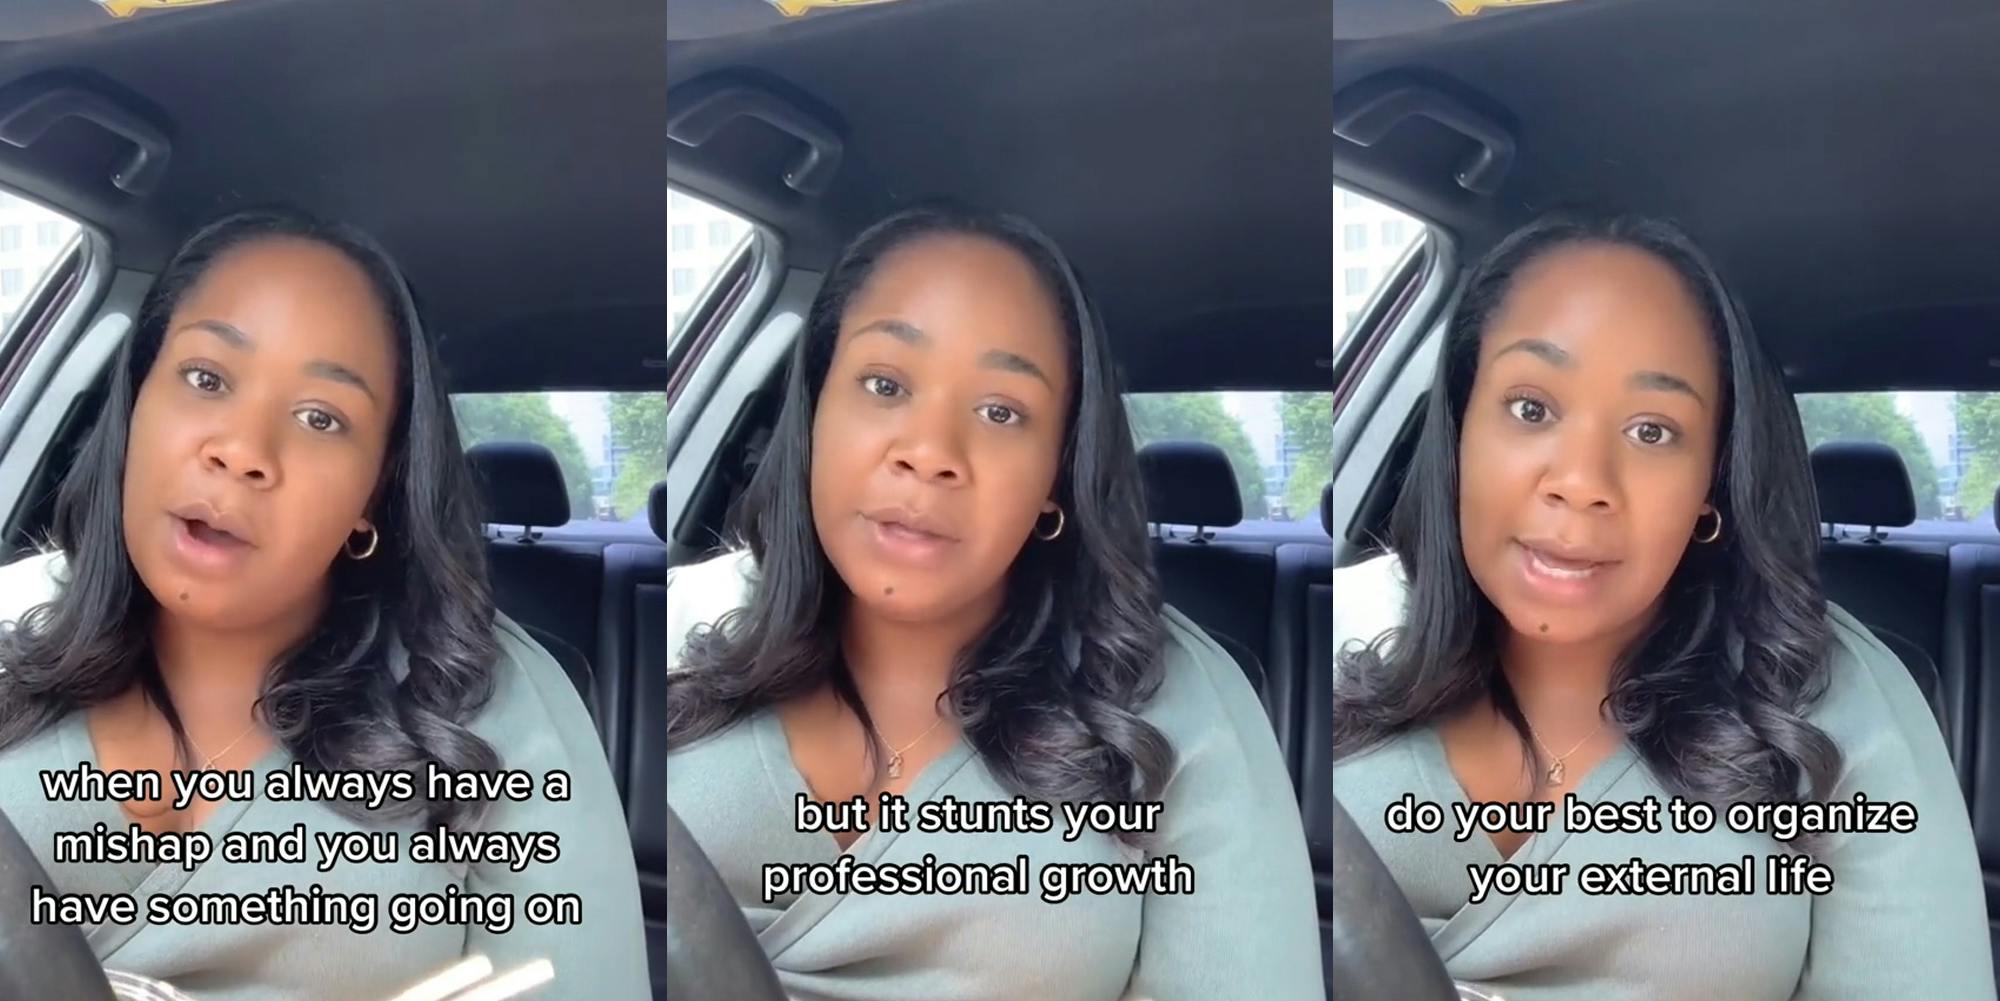 woman speaking in car with caption "when you always have a mishap and you always have something going on" (l) woman speaking in car with caption "but it stunts your professional growth" (c) woman speaking in car with caption "do your best to organize your external life" (r)